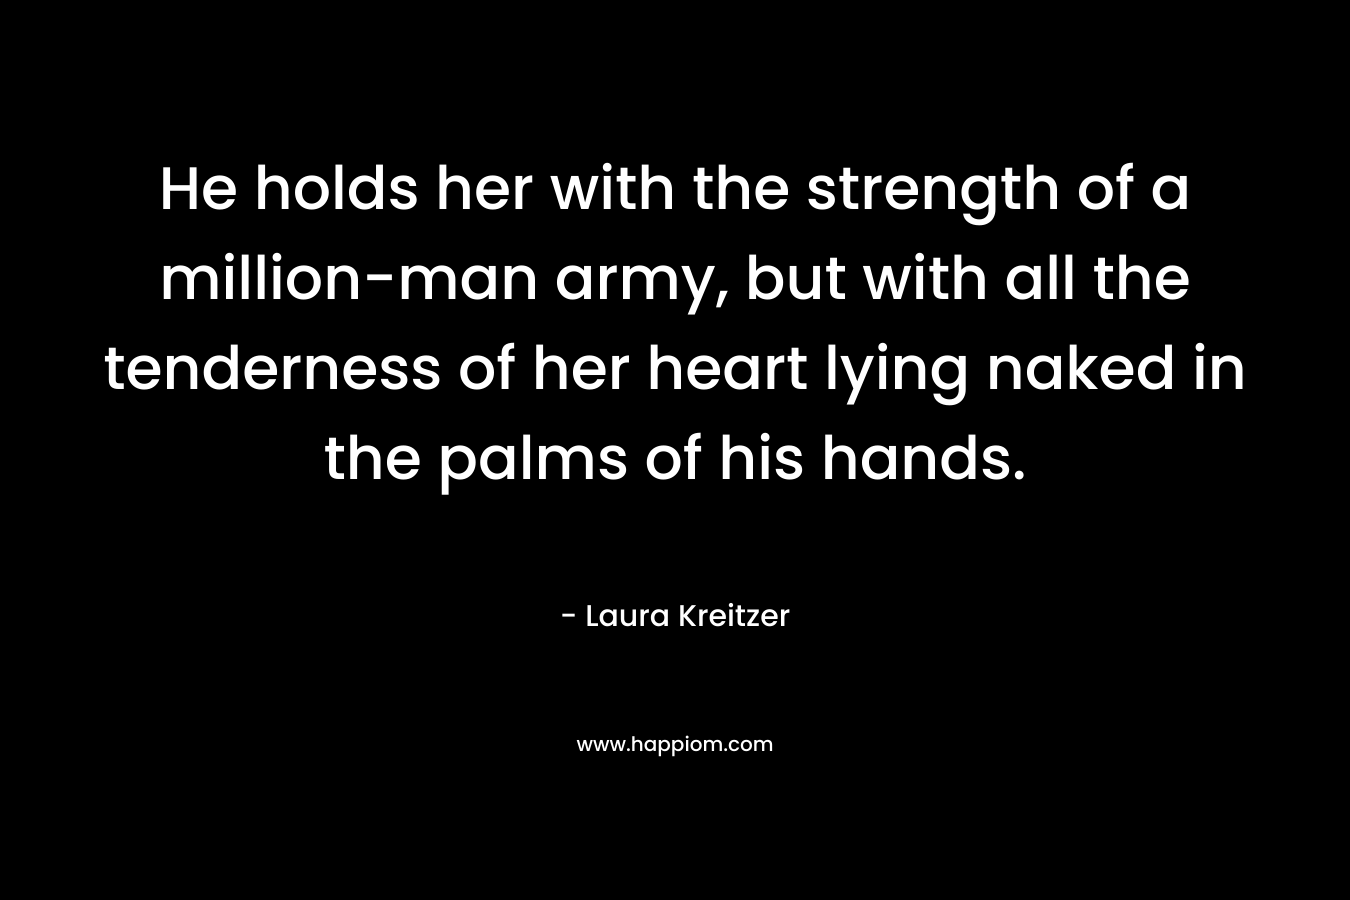 He holds her with the strength of a million-man army, but with all the tenderness of her heart lying naked in the palms of his hands. – Laura Kreitzer